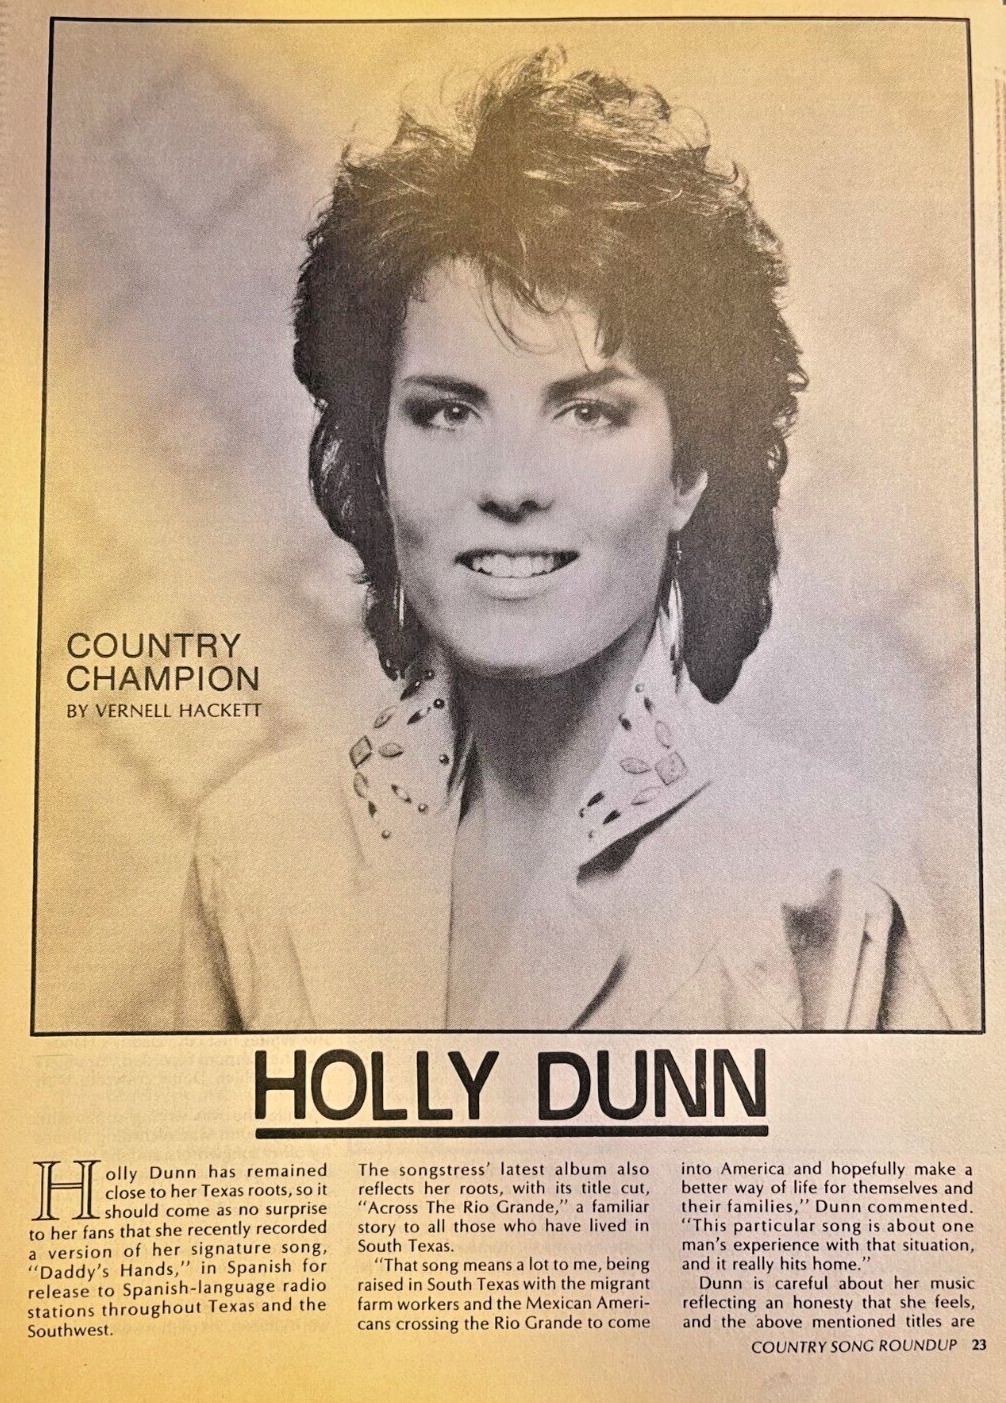 1989 Country Western Performer Holly Dunn